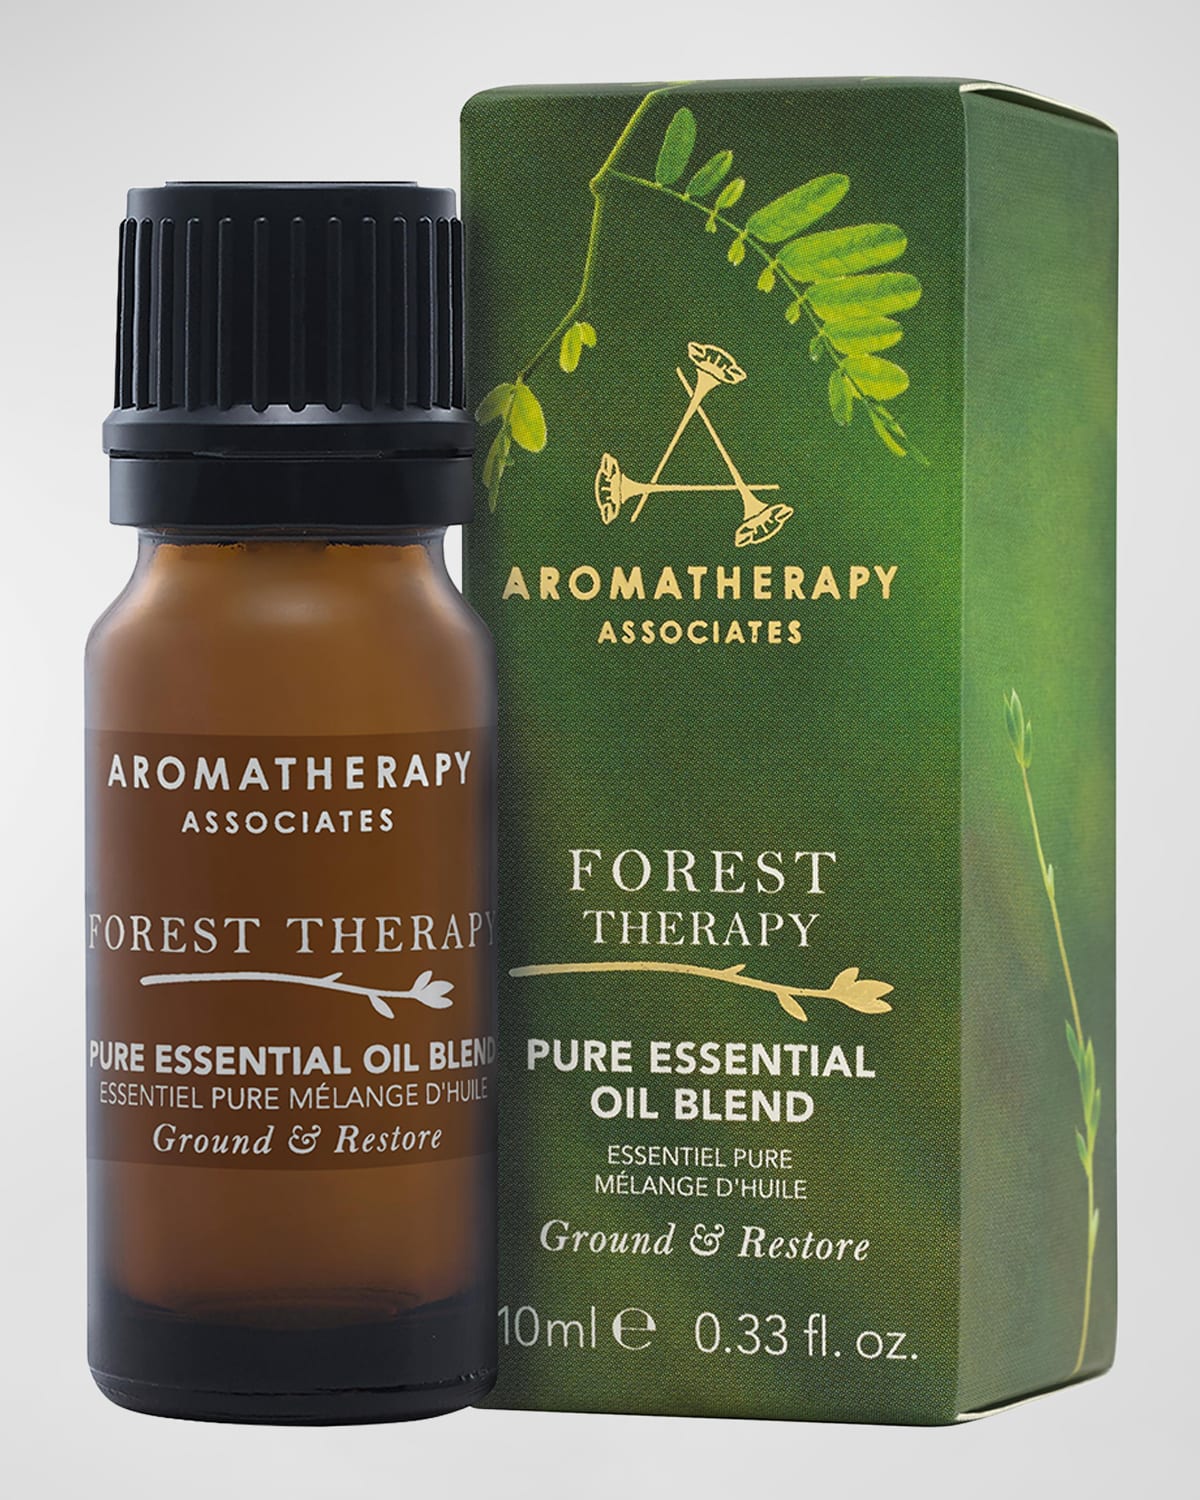 Aromatherapy Associates 0.34 oz. Forest Therapy Pure Essential Oil Blend